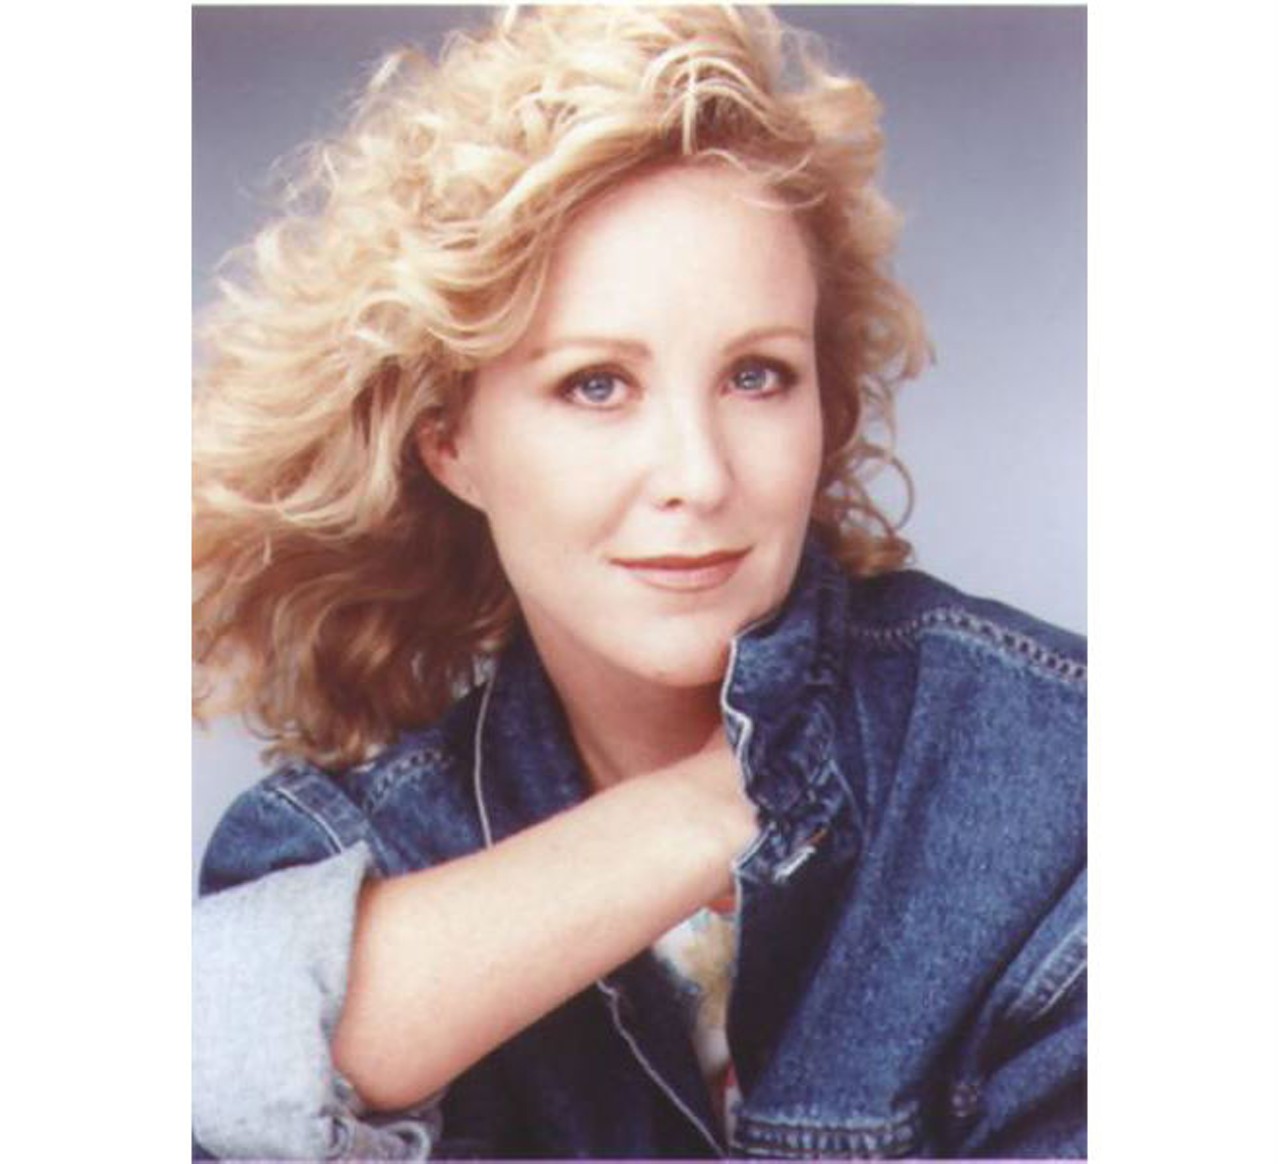 Befoer Joanna Kerns was the mom on Growing Pains, she played  the Blue Fairy from "Pinocchio" in the Main Street Electrical Parade. Photo via classictv.com